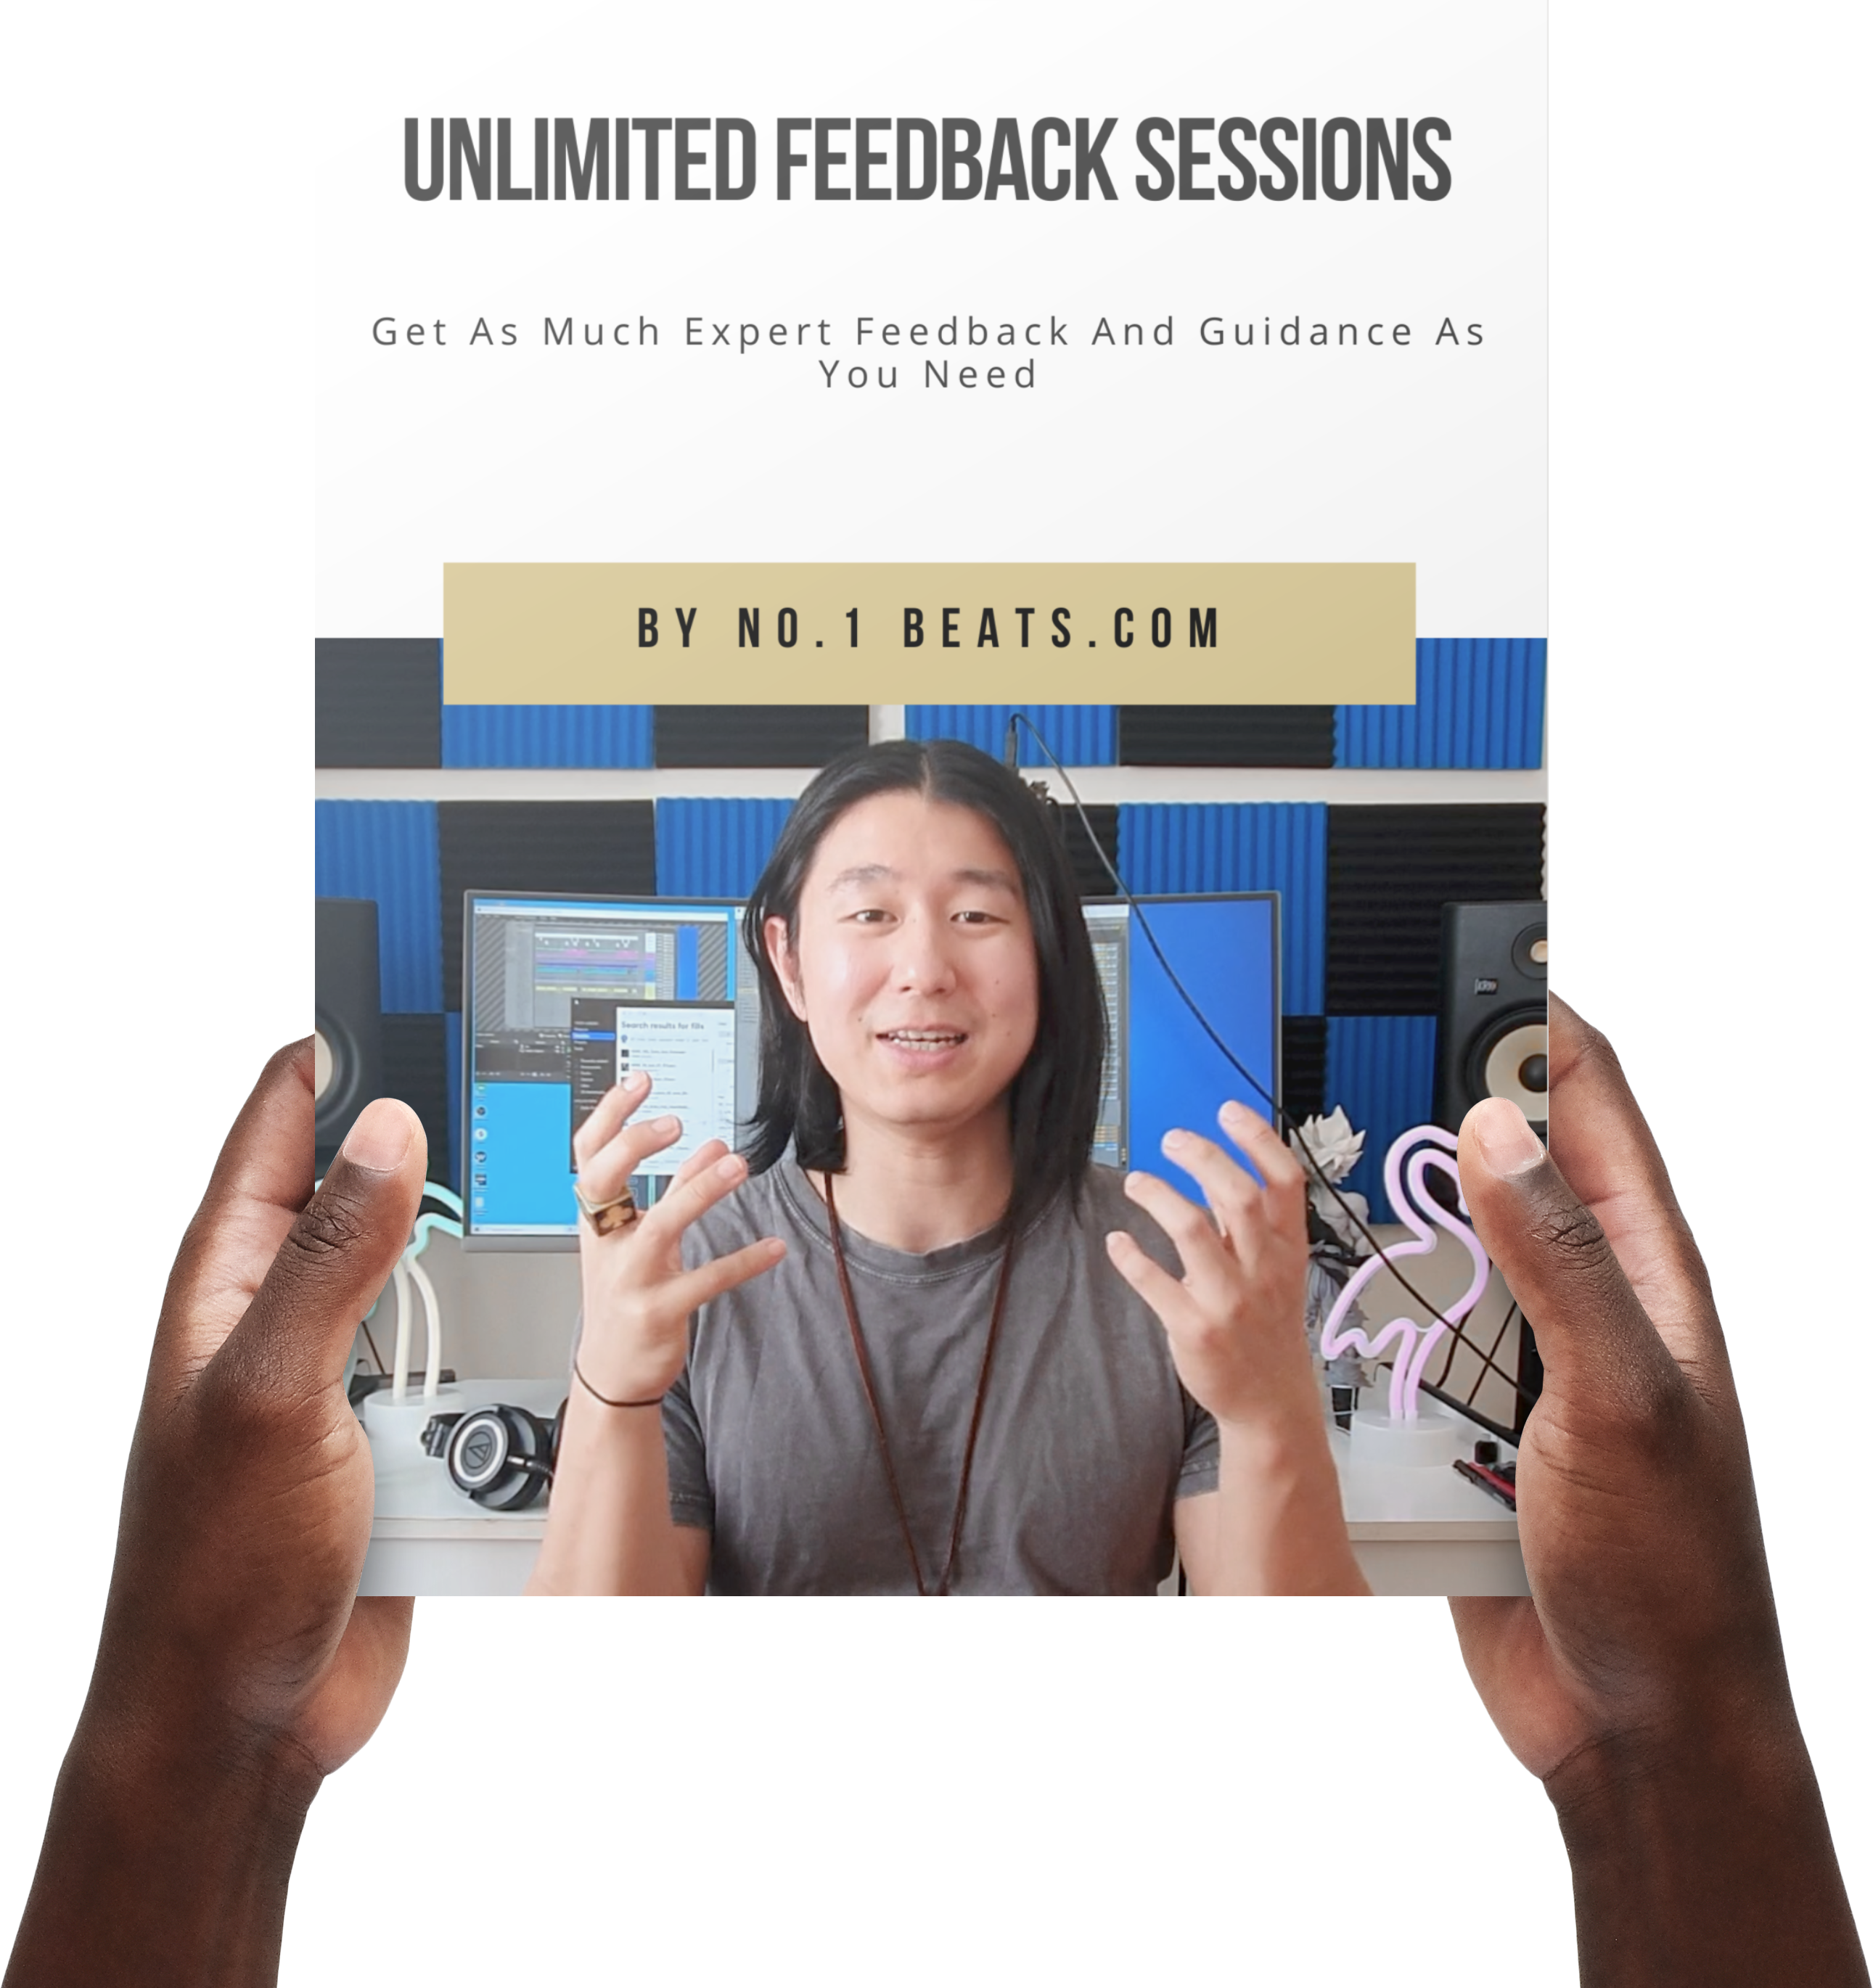 No 1 Beats Unlimited Feedback Sessions